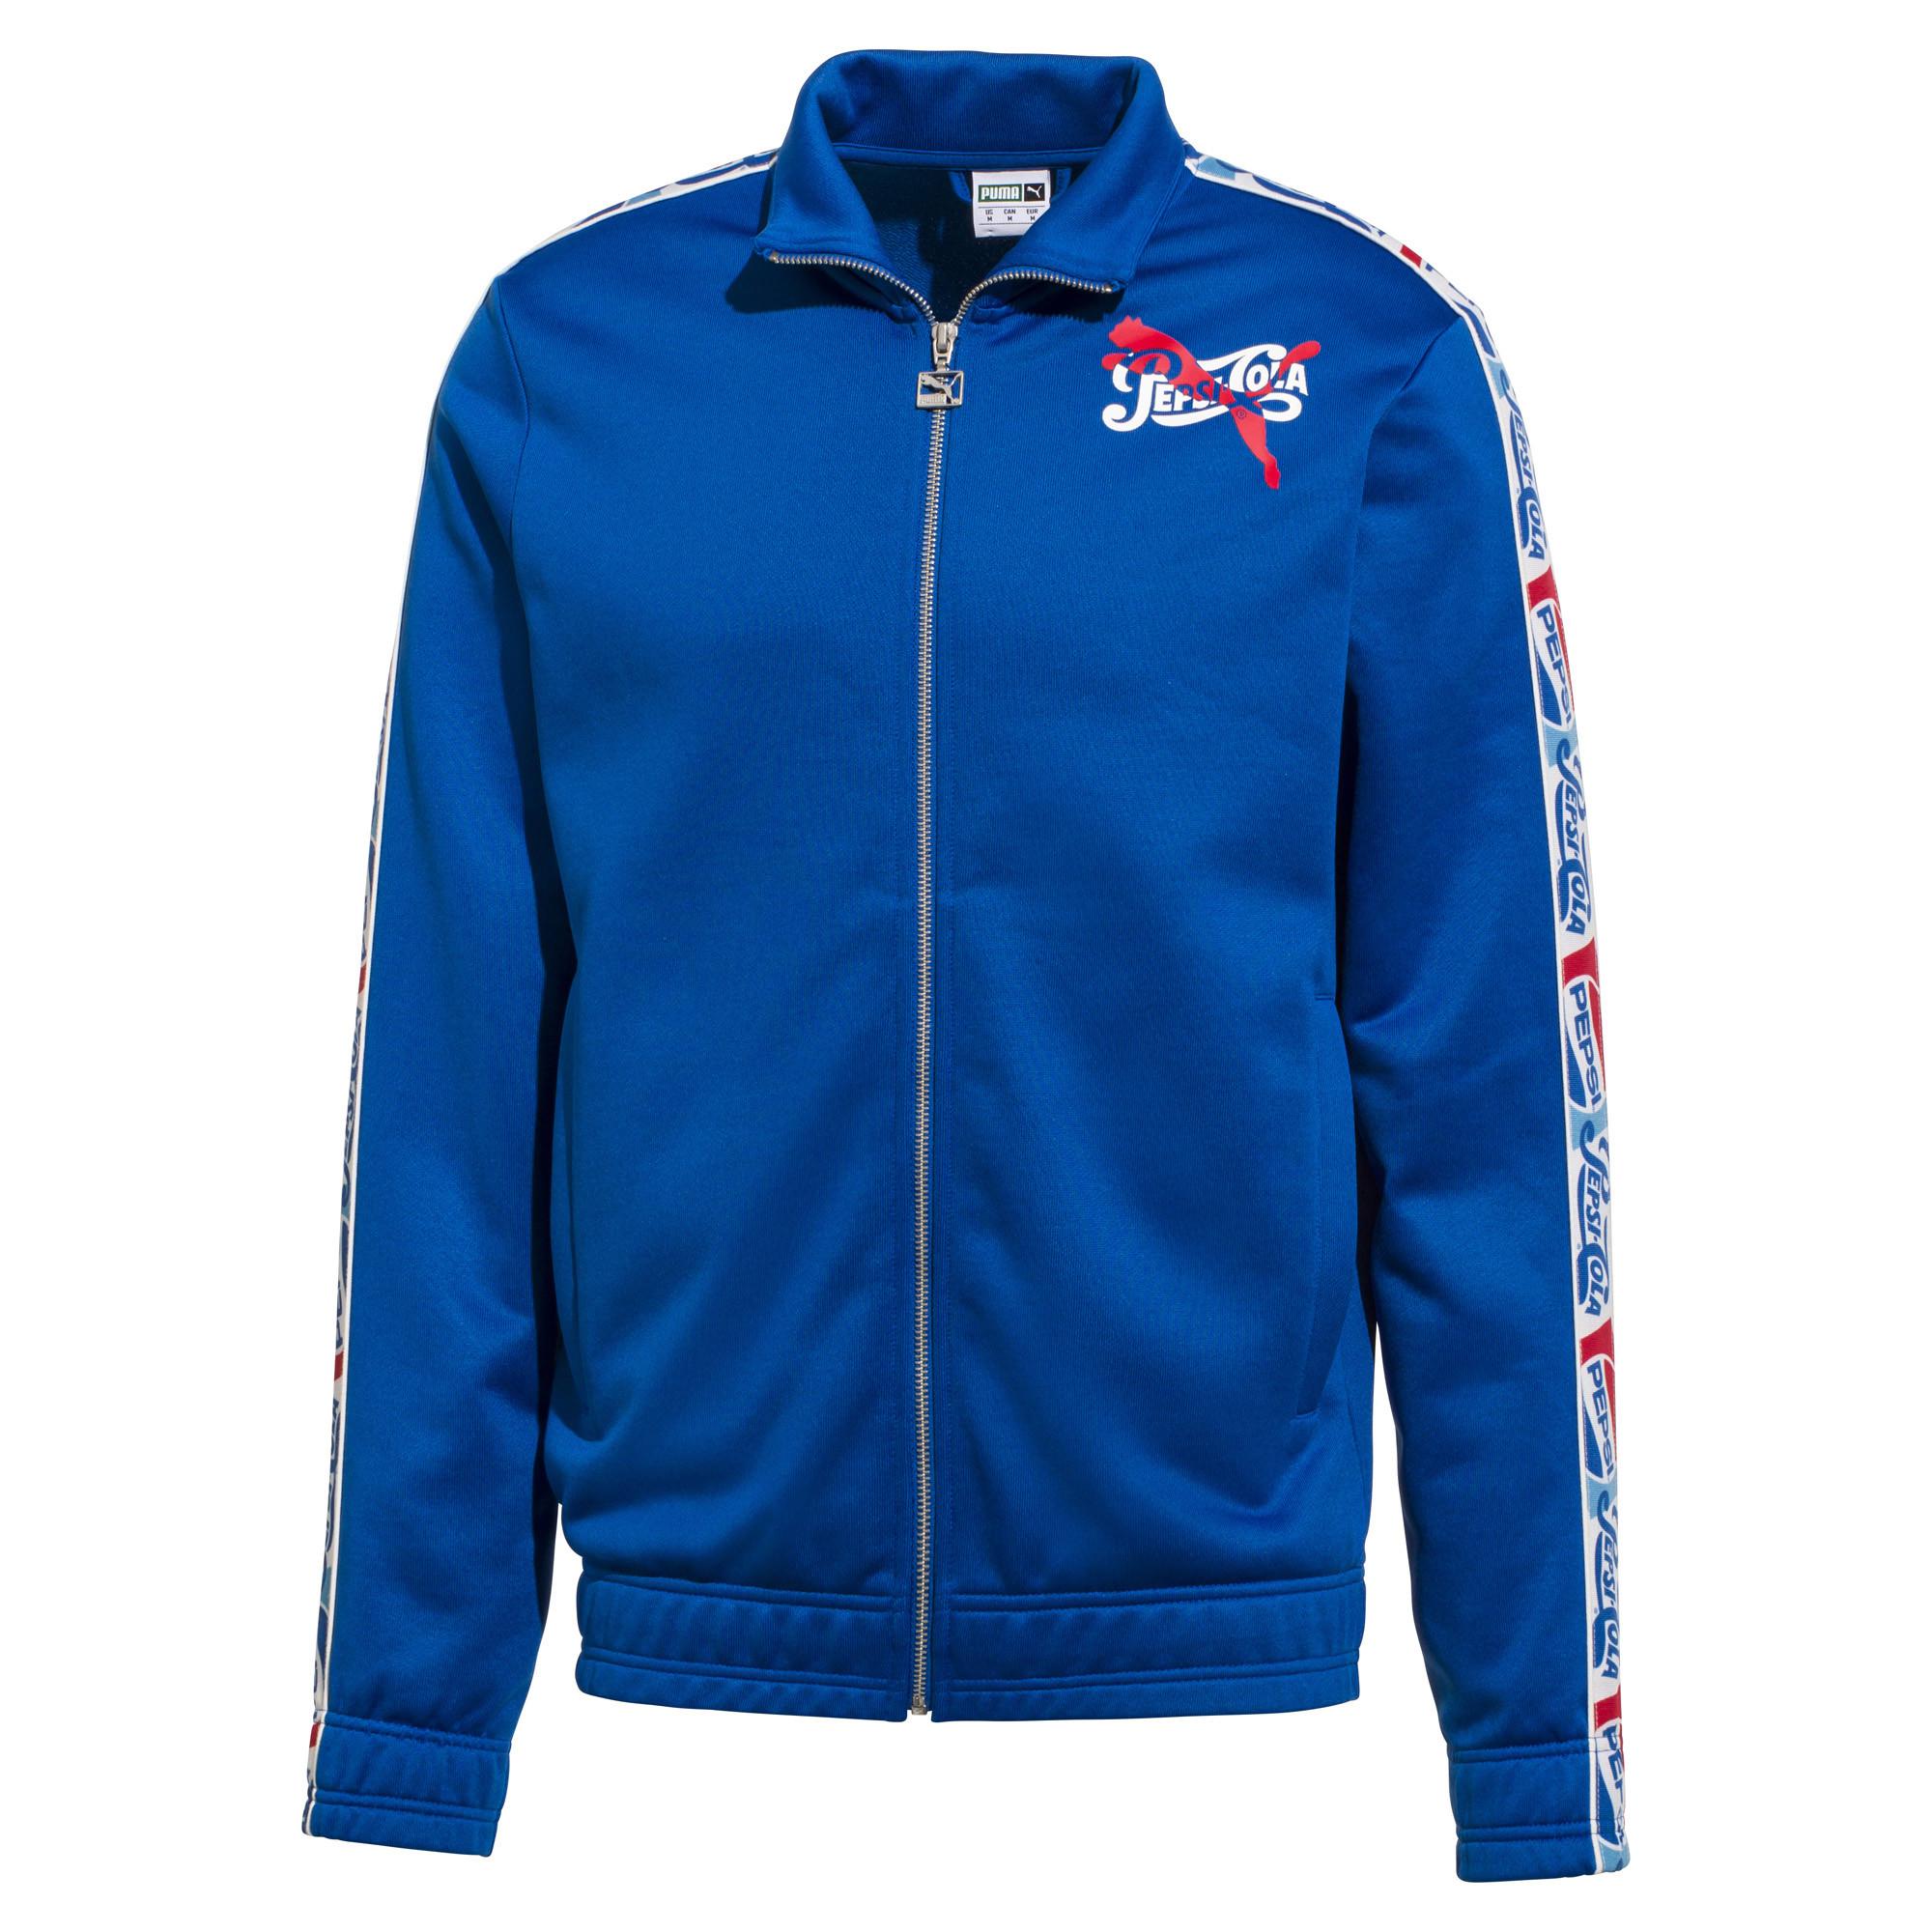 PUMA Synthetic Pepsi X Tape Track Top 